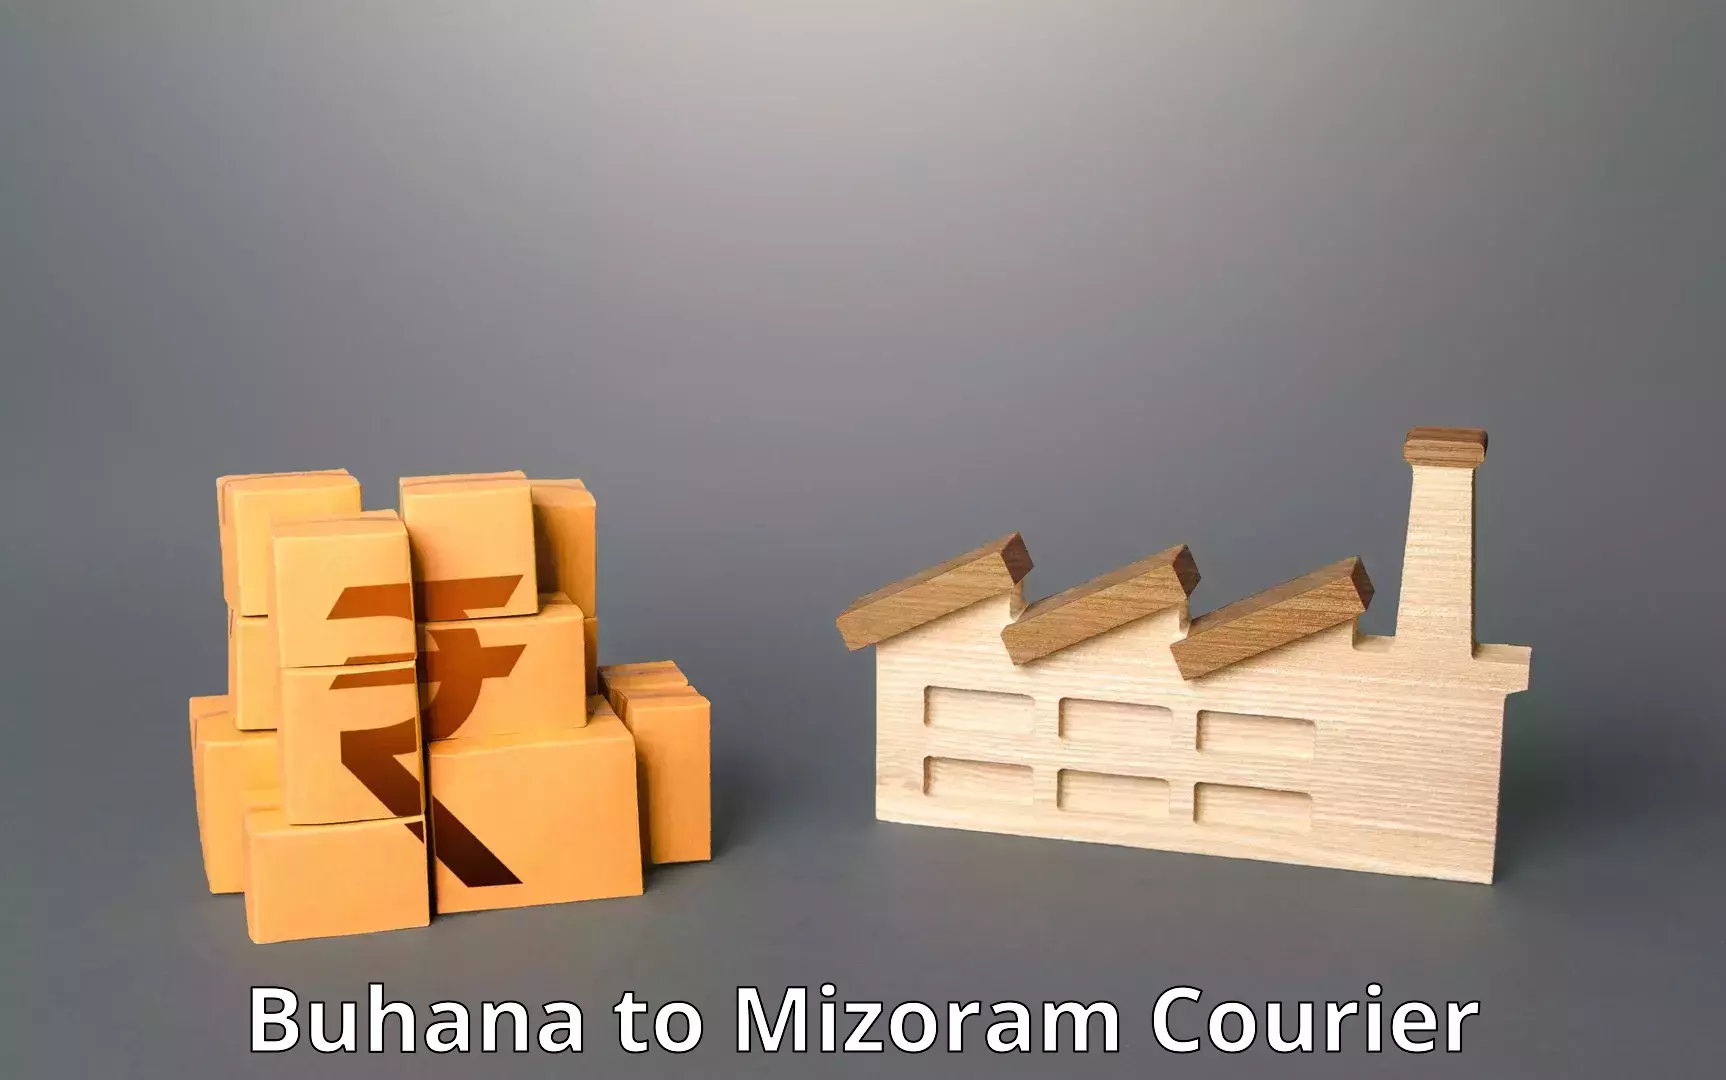 Express delivery capabilities in Buhana to Mizoram